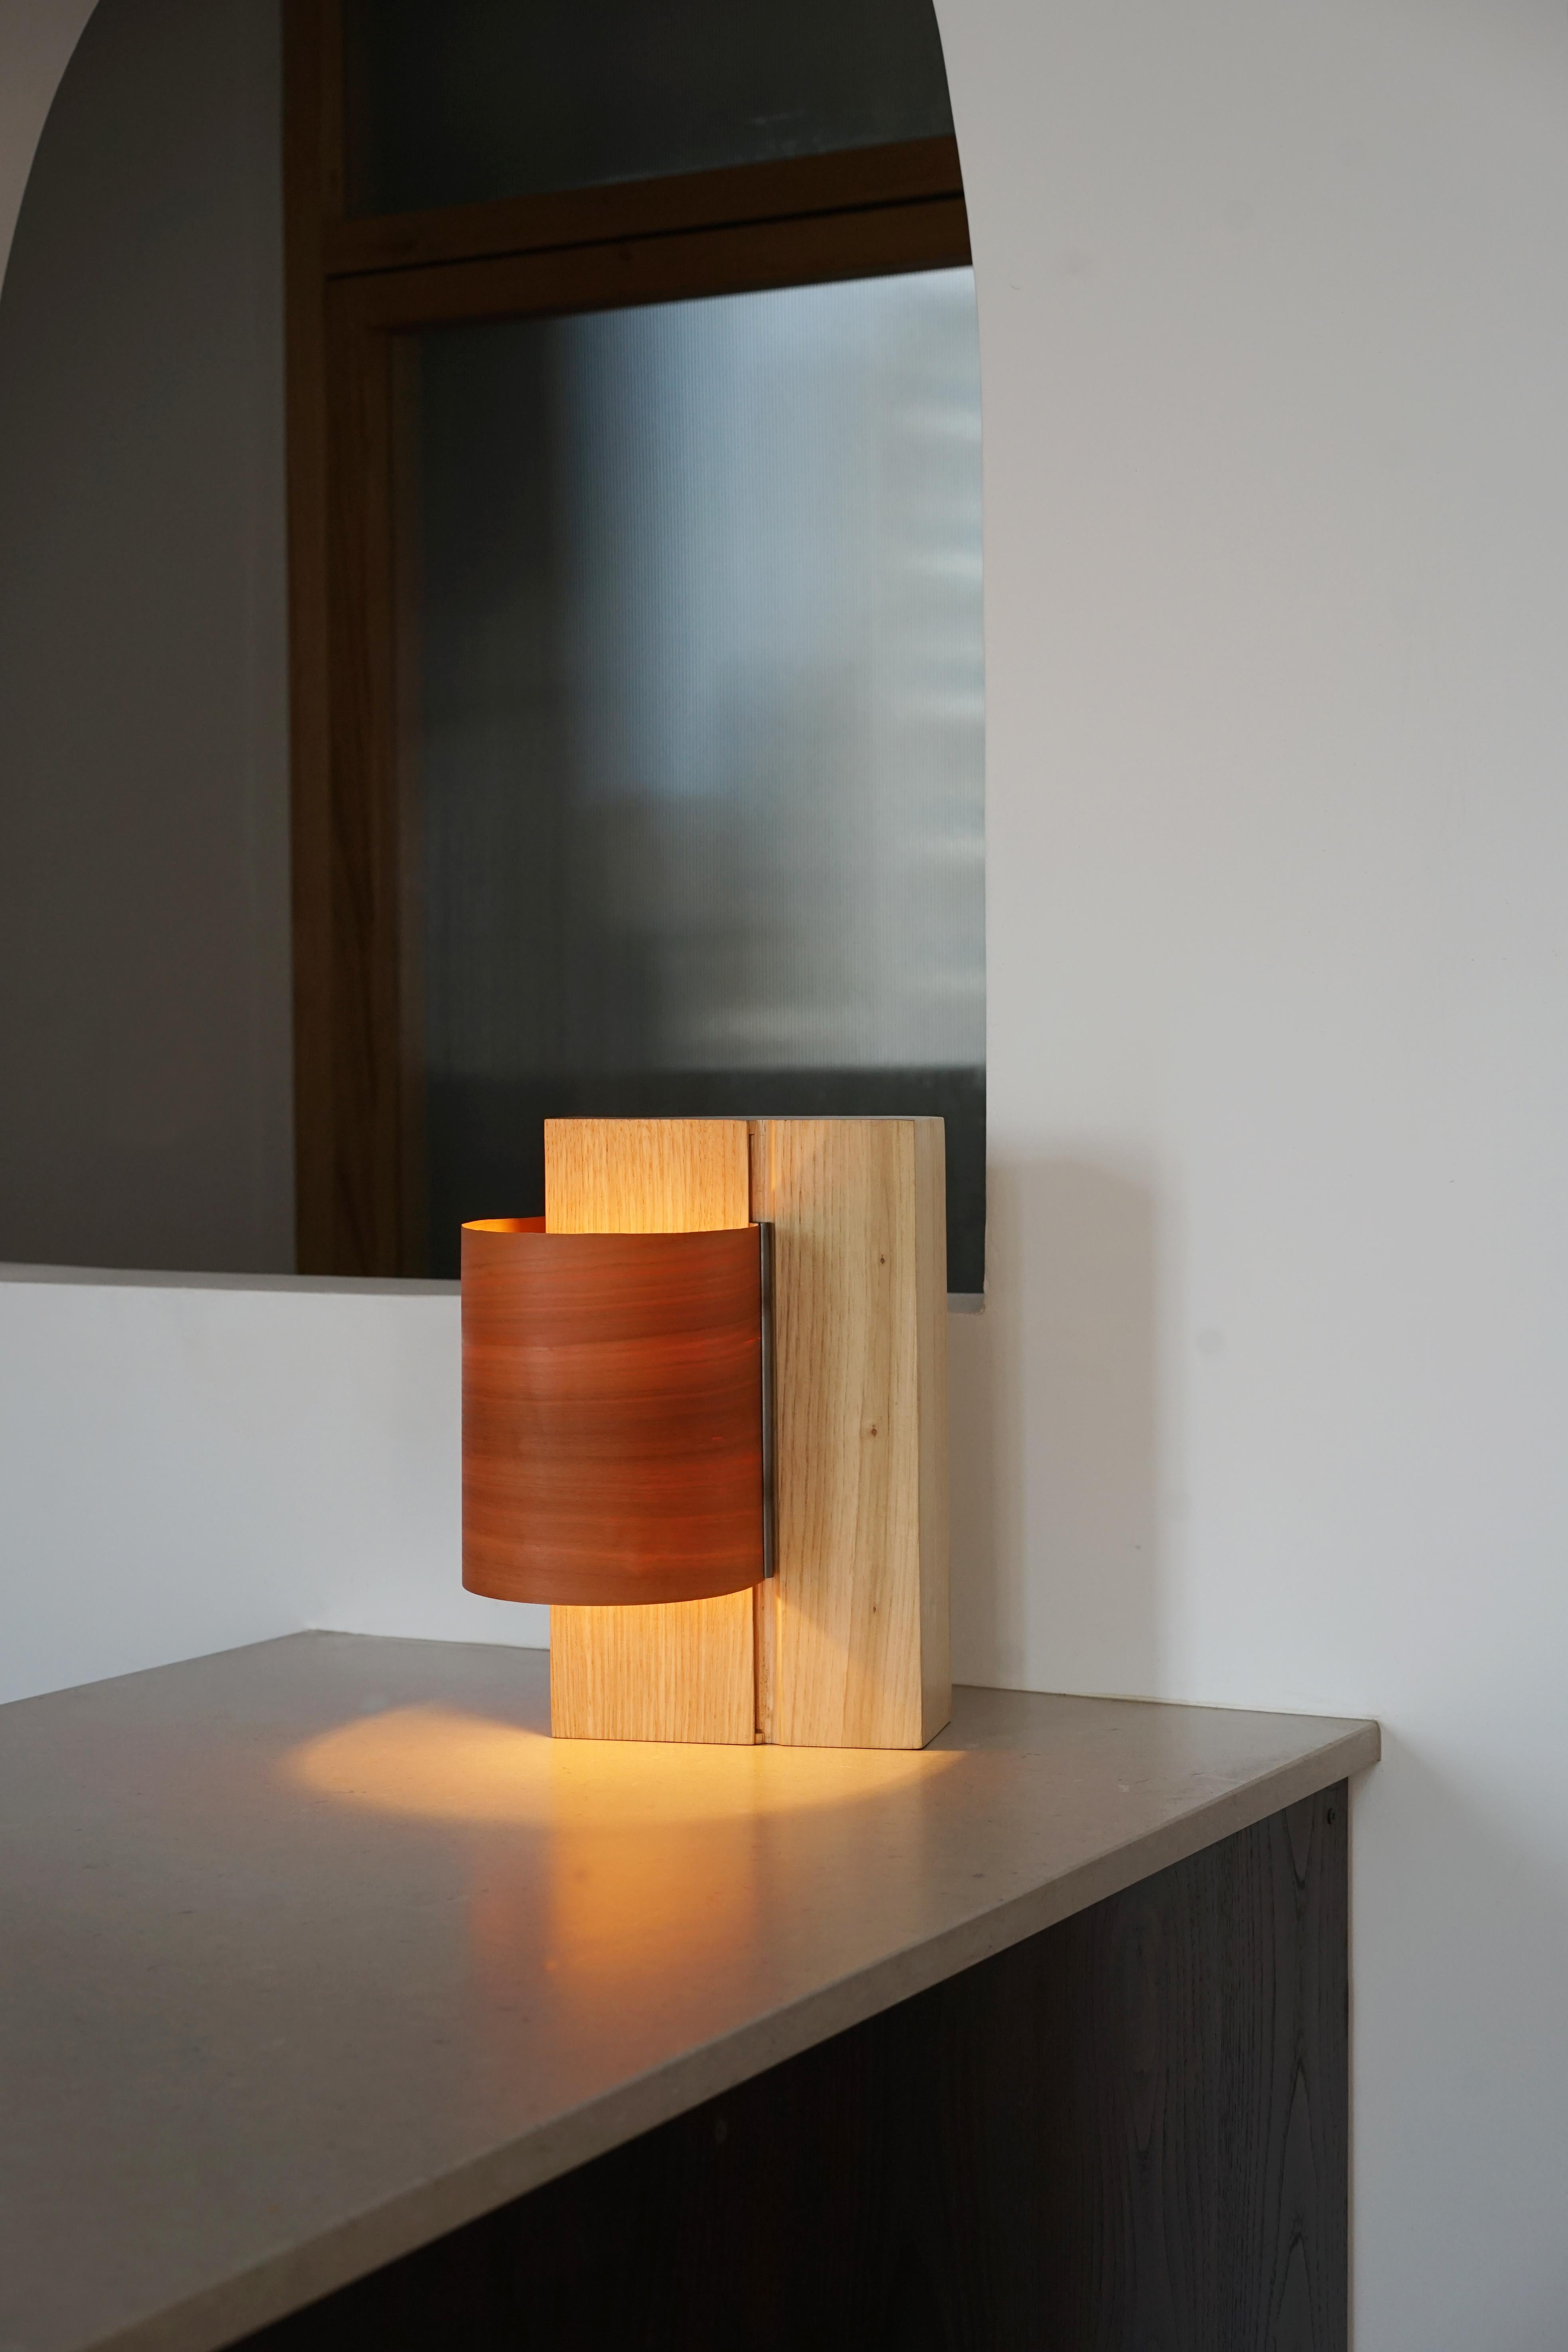 This table lamp celebrates the intrinsic qualities of wood veneer, in particular its finesse and grain. Thanks to a stainless steel sliding system, the veneer sheet moves up and down to direct the light according to your needs. Its name takes root